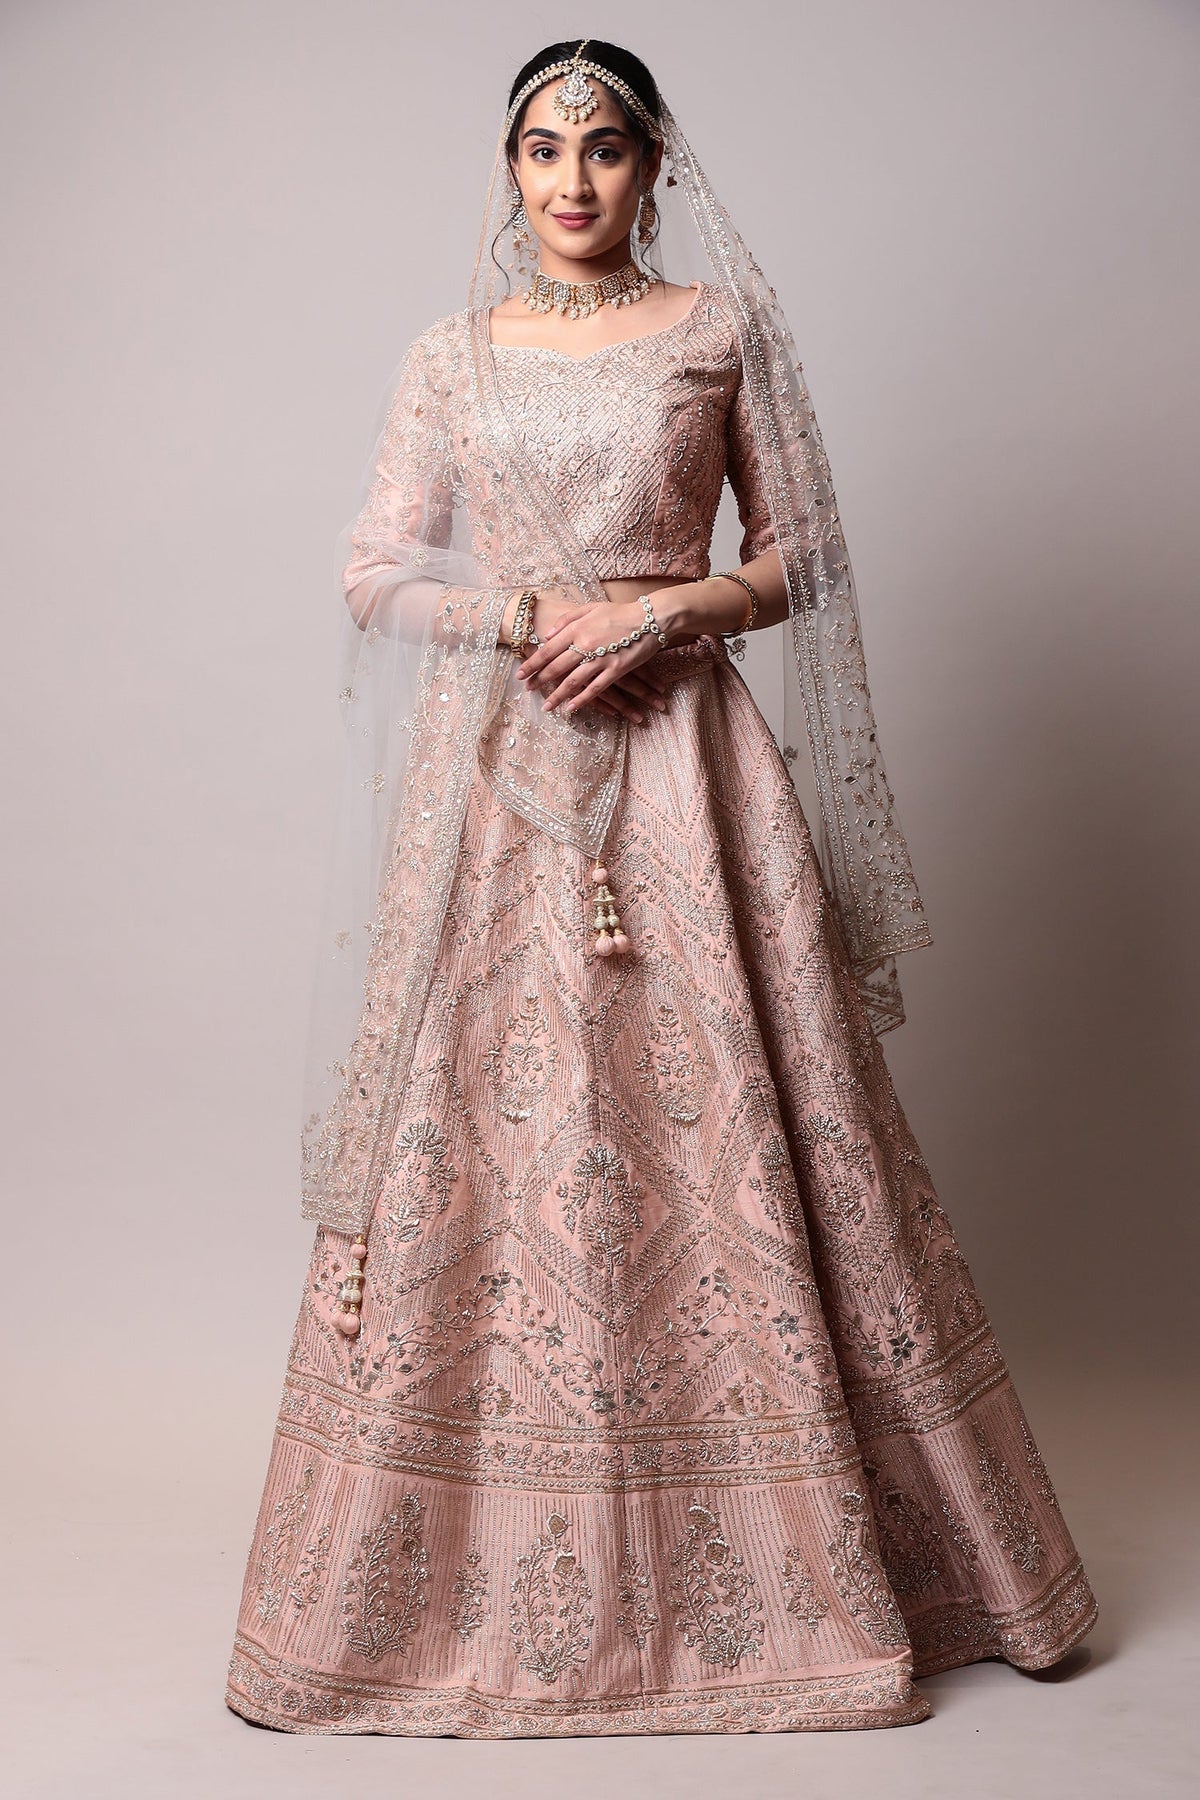 Looking For A Perfect Lehenga In Jaipur For The Big Day? Say No More -  Rajasthan Studio